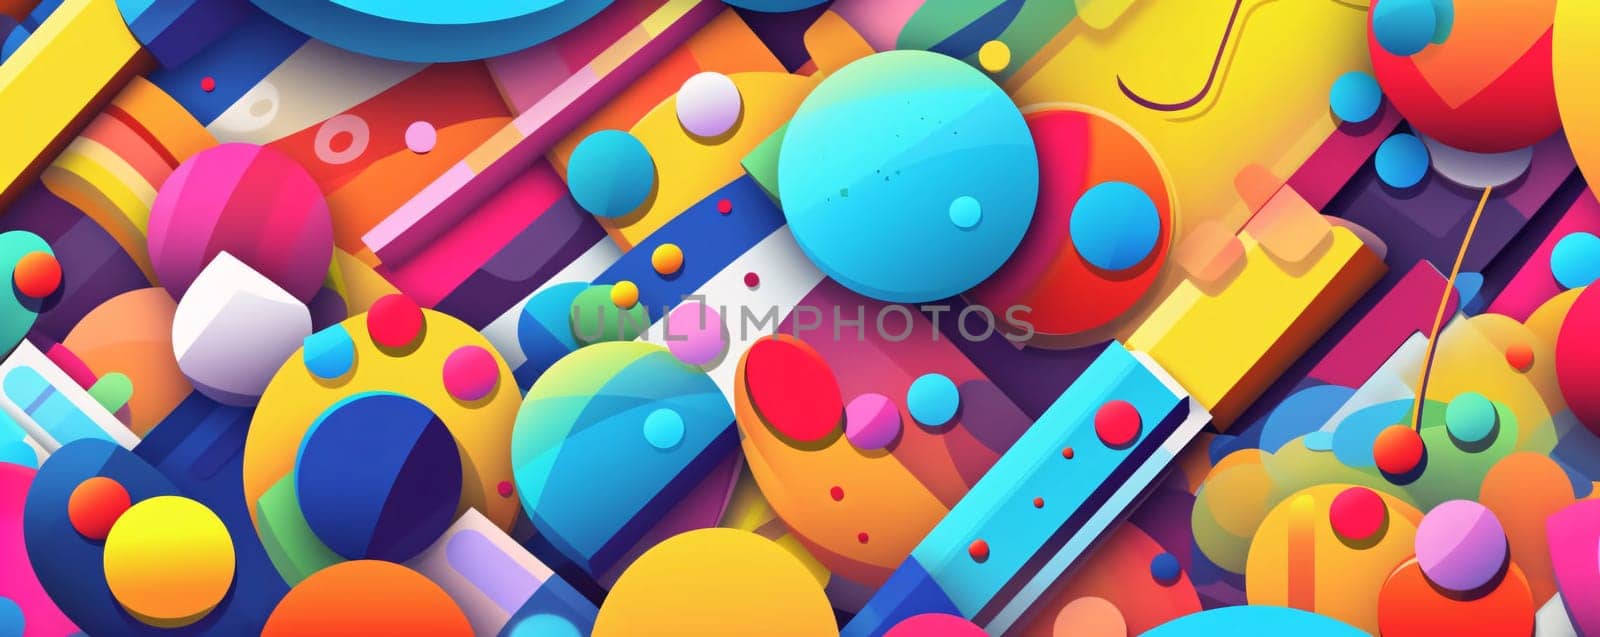 Abstract background design: Colorful abstract background with circles and dots. Vector illustration for your design